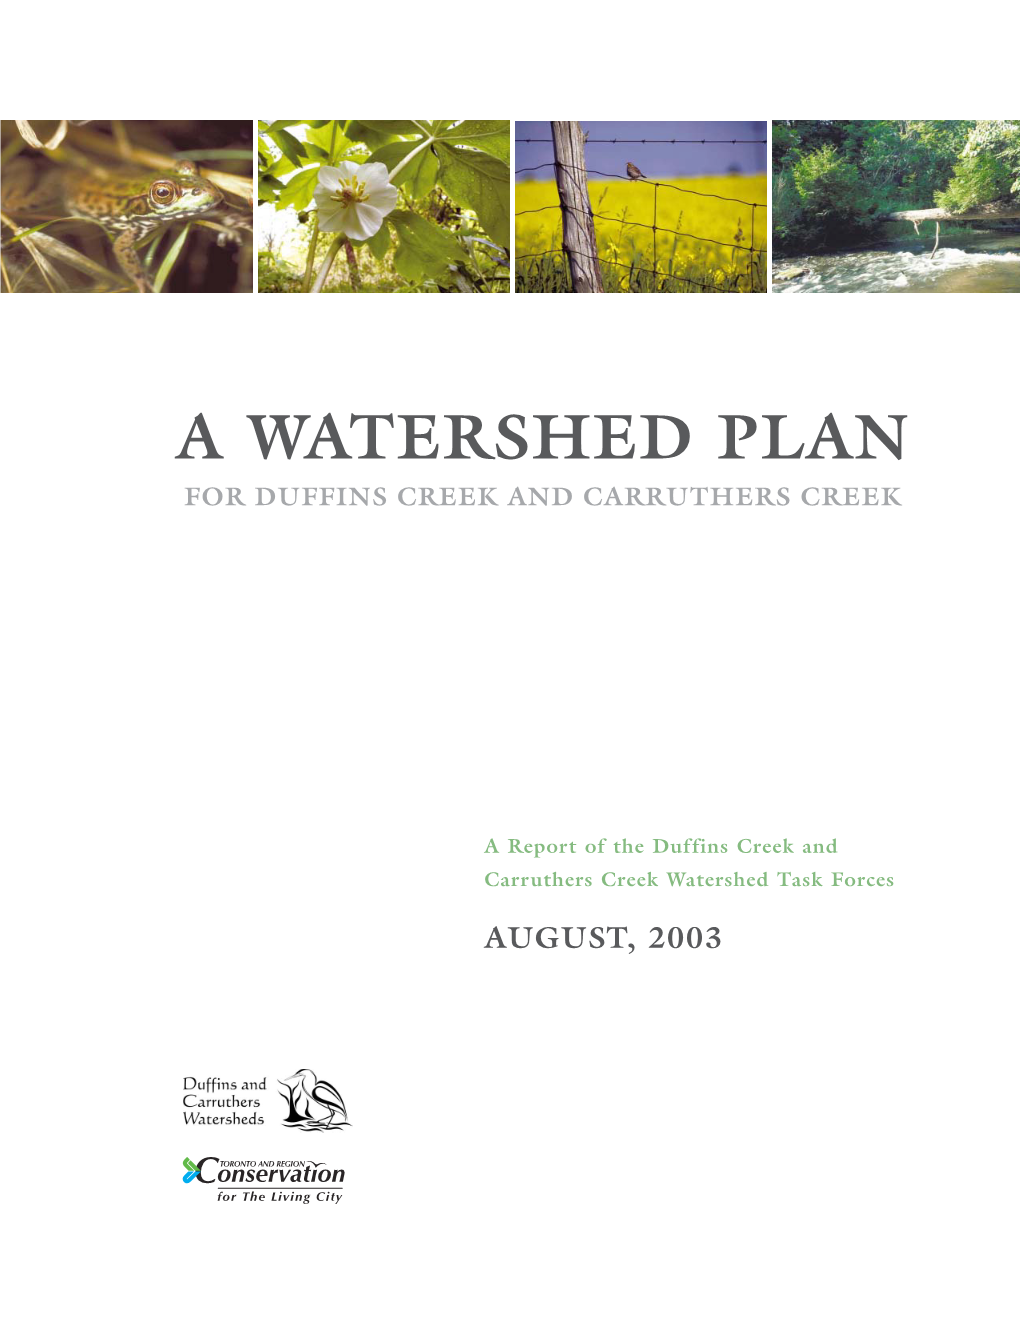 A Watershed Plan for Duffins and Carruthers Creek